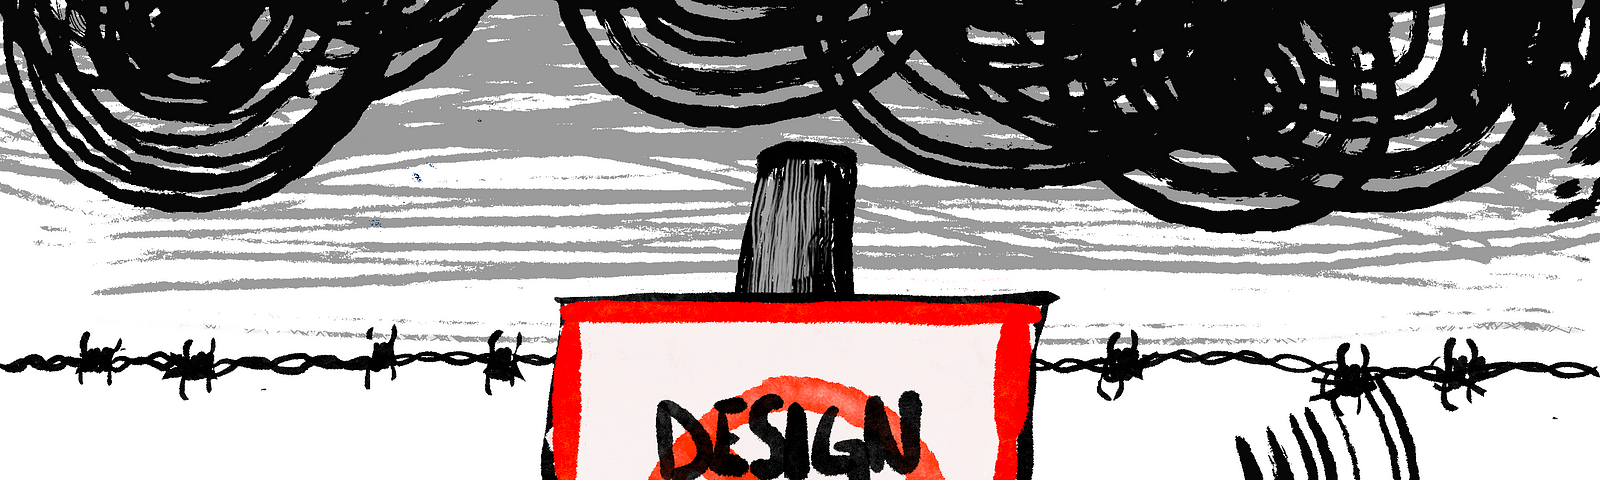 An image showing a fence with a sign prohibiting design hand over.